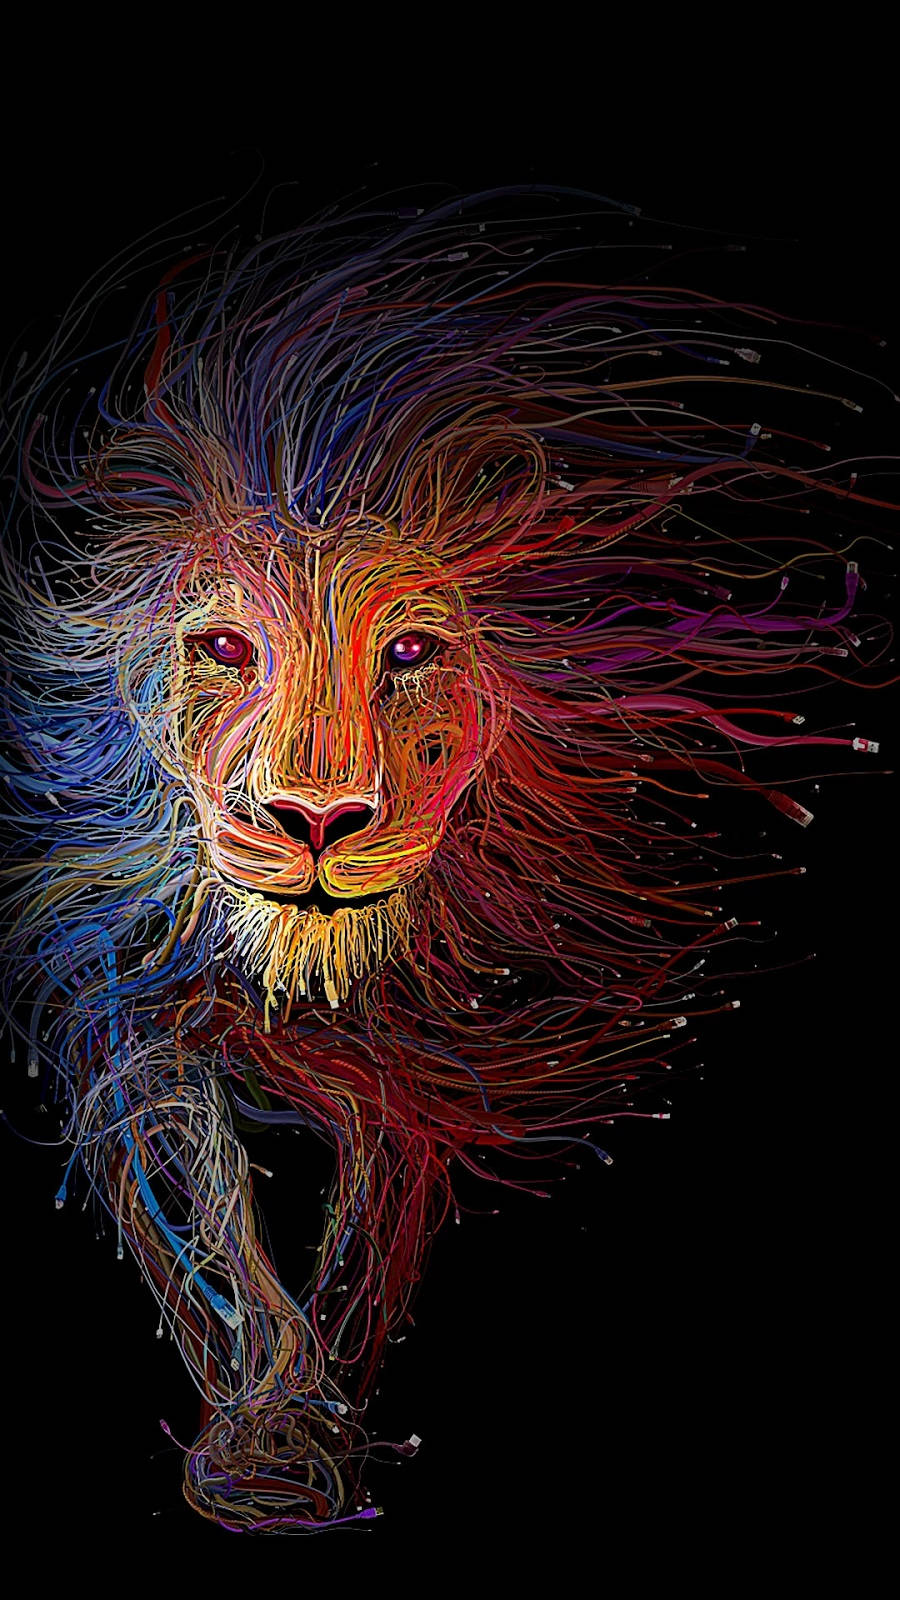 Majestic Lion Of Lyon: Artistic Cable Sculpture On Infinix Background